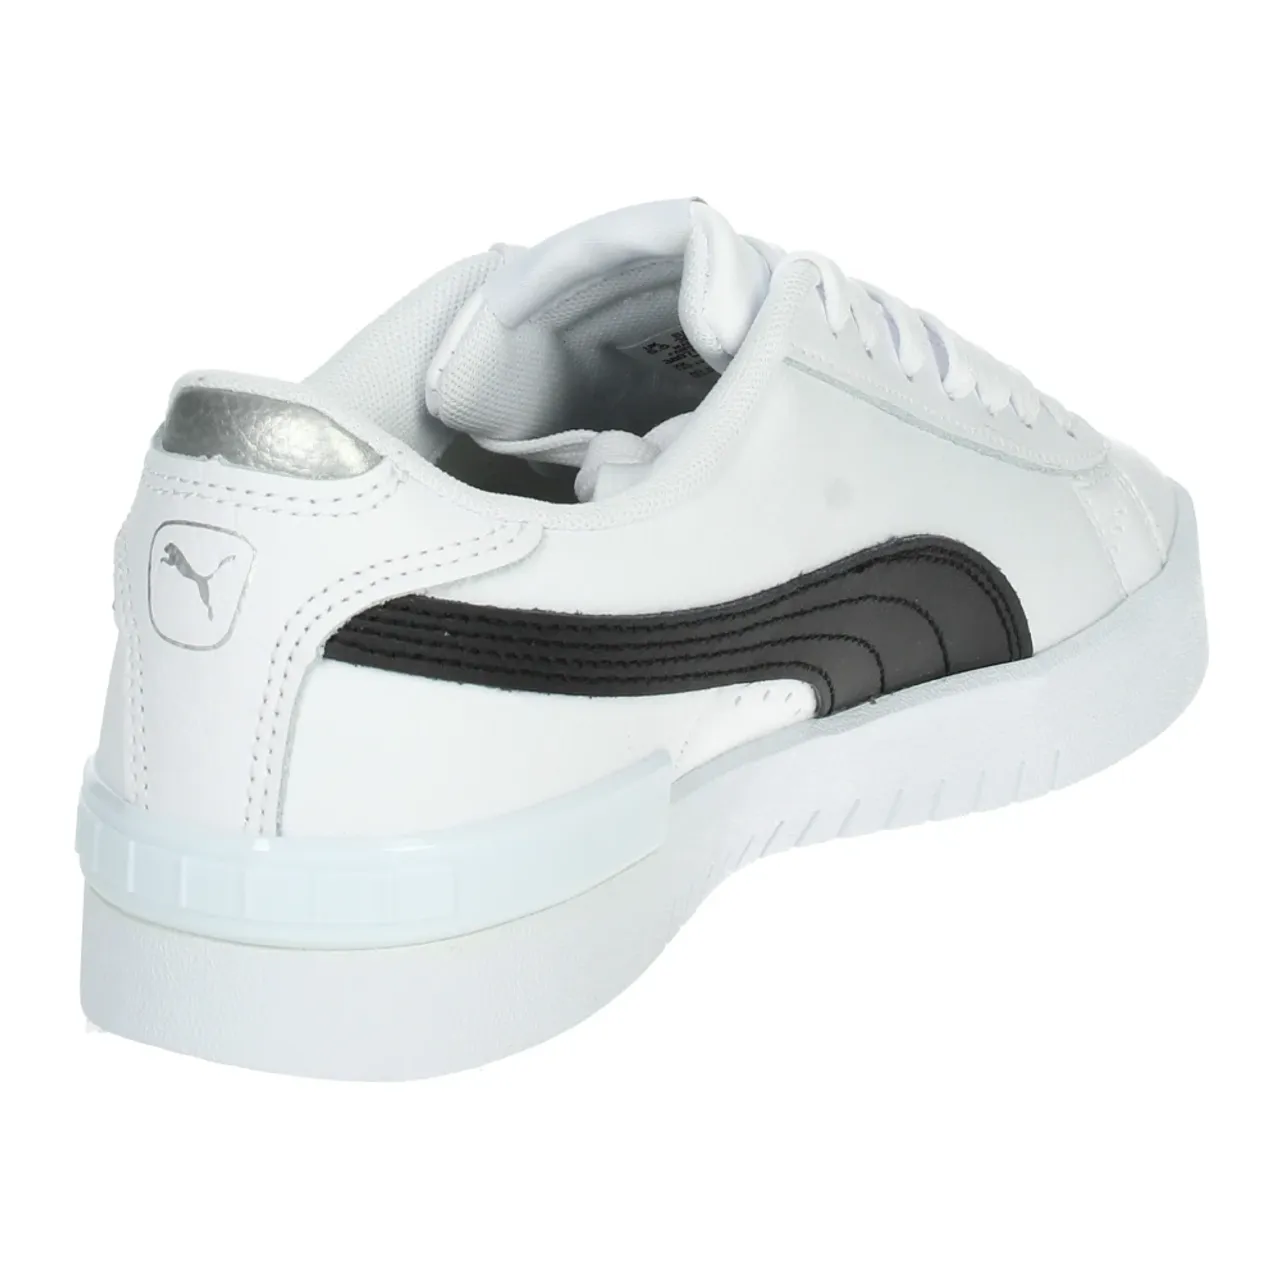 Puma , Low Top Sneakers ,White female, Sizes: